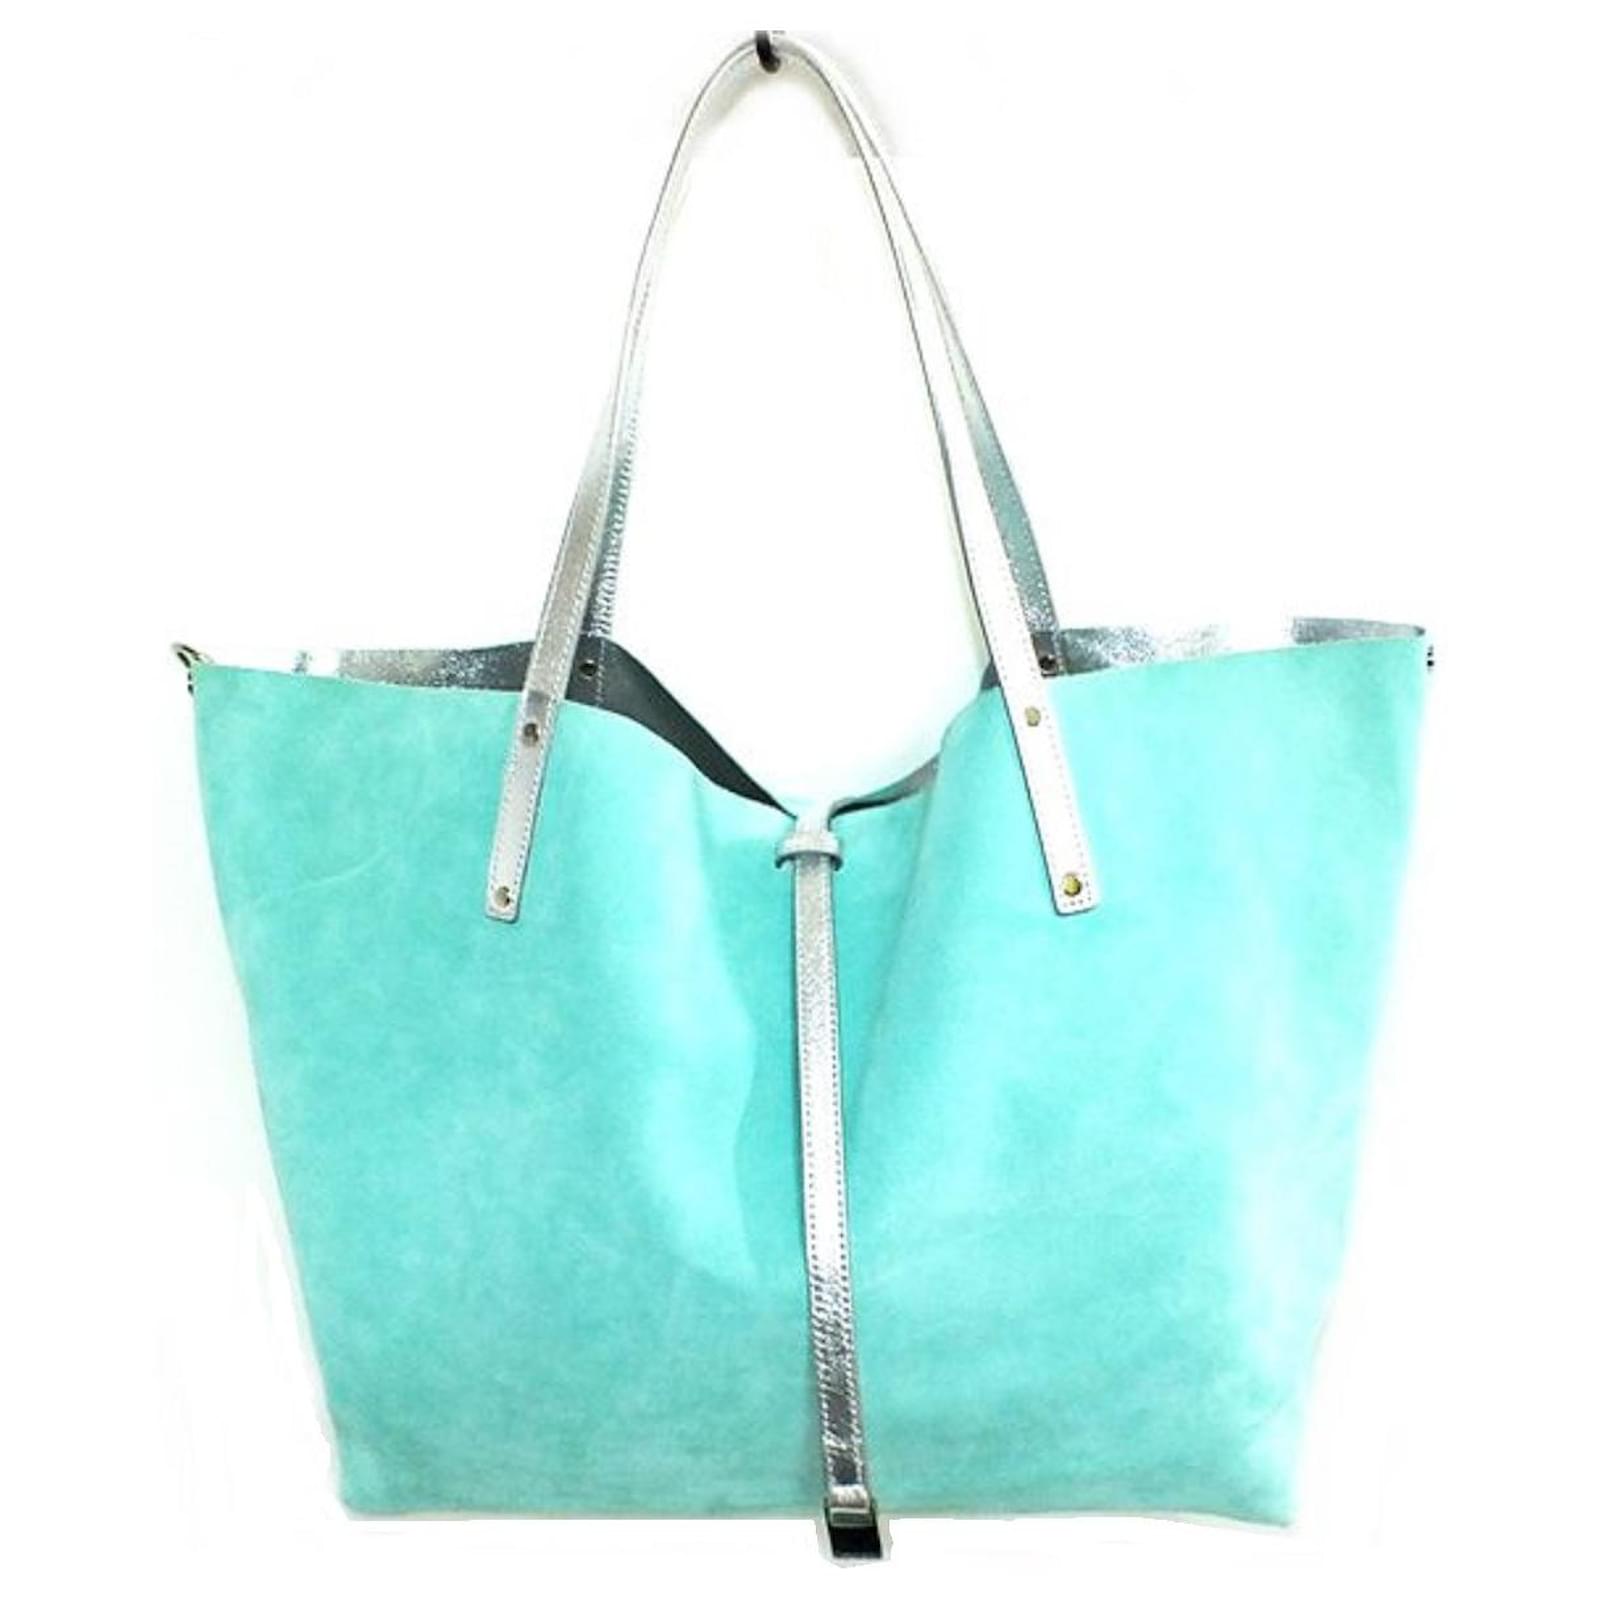 Tiffany & Co Reversible Suede & Metallic Leather Tote Bag